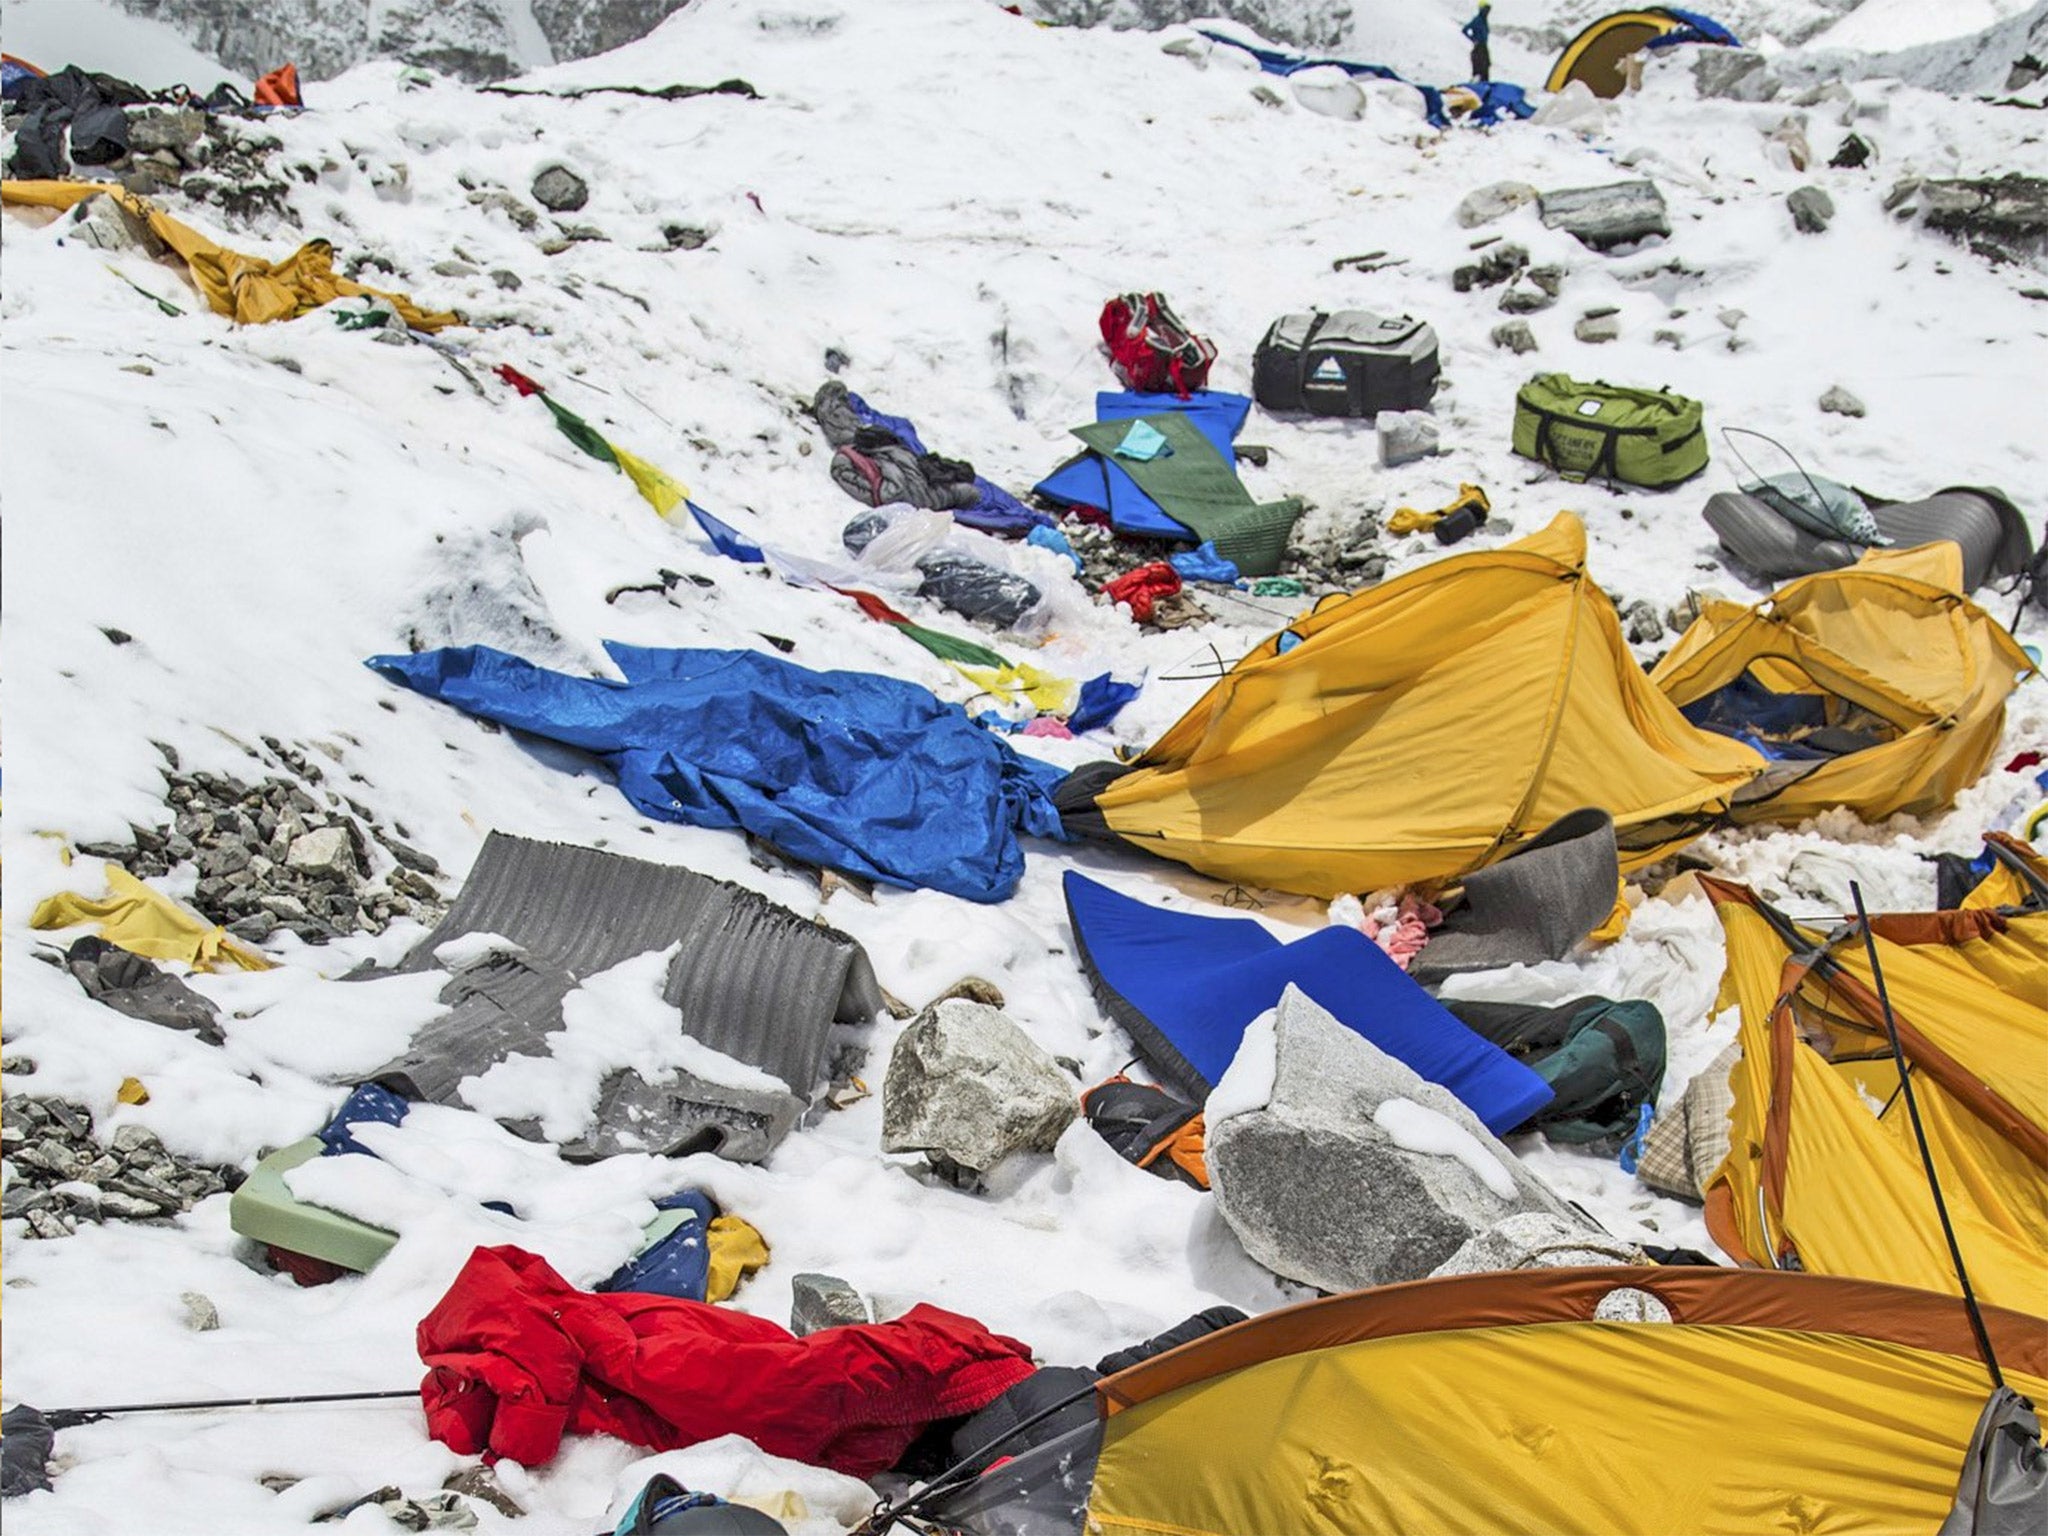 The Everest south base camp a day after being destroyed by an avalanche which left at least 17 people dead